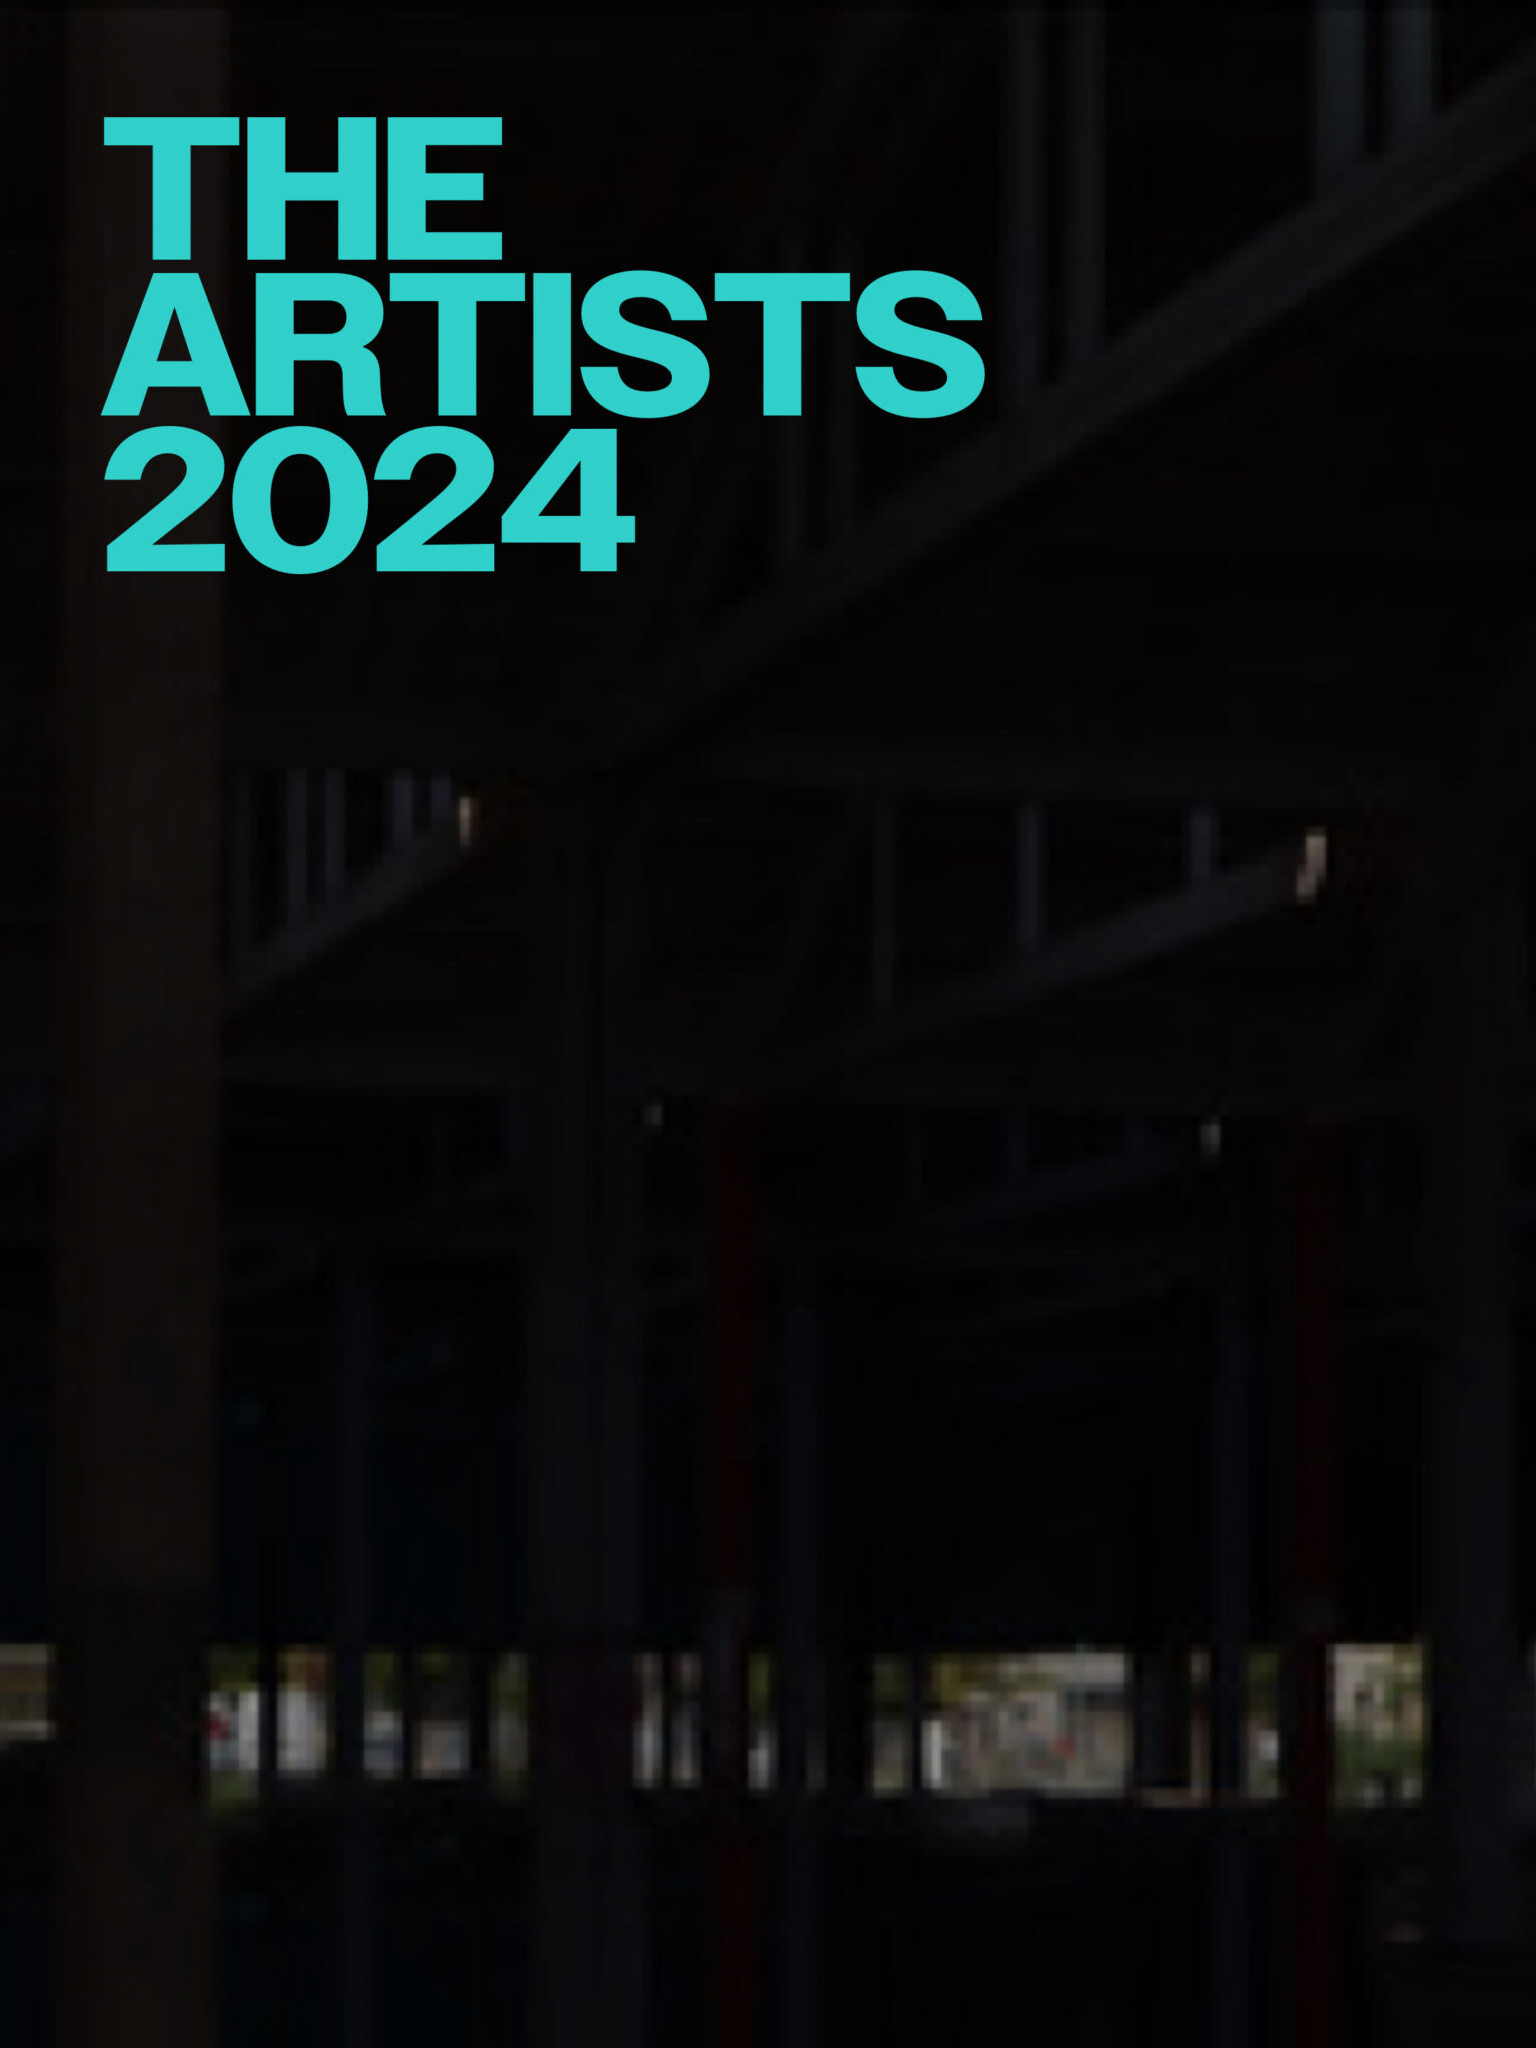 The artists of the year 2024